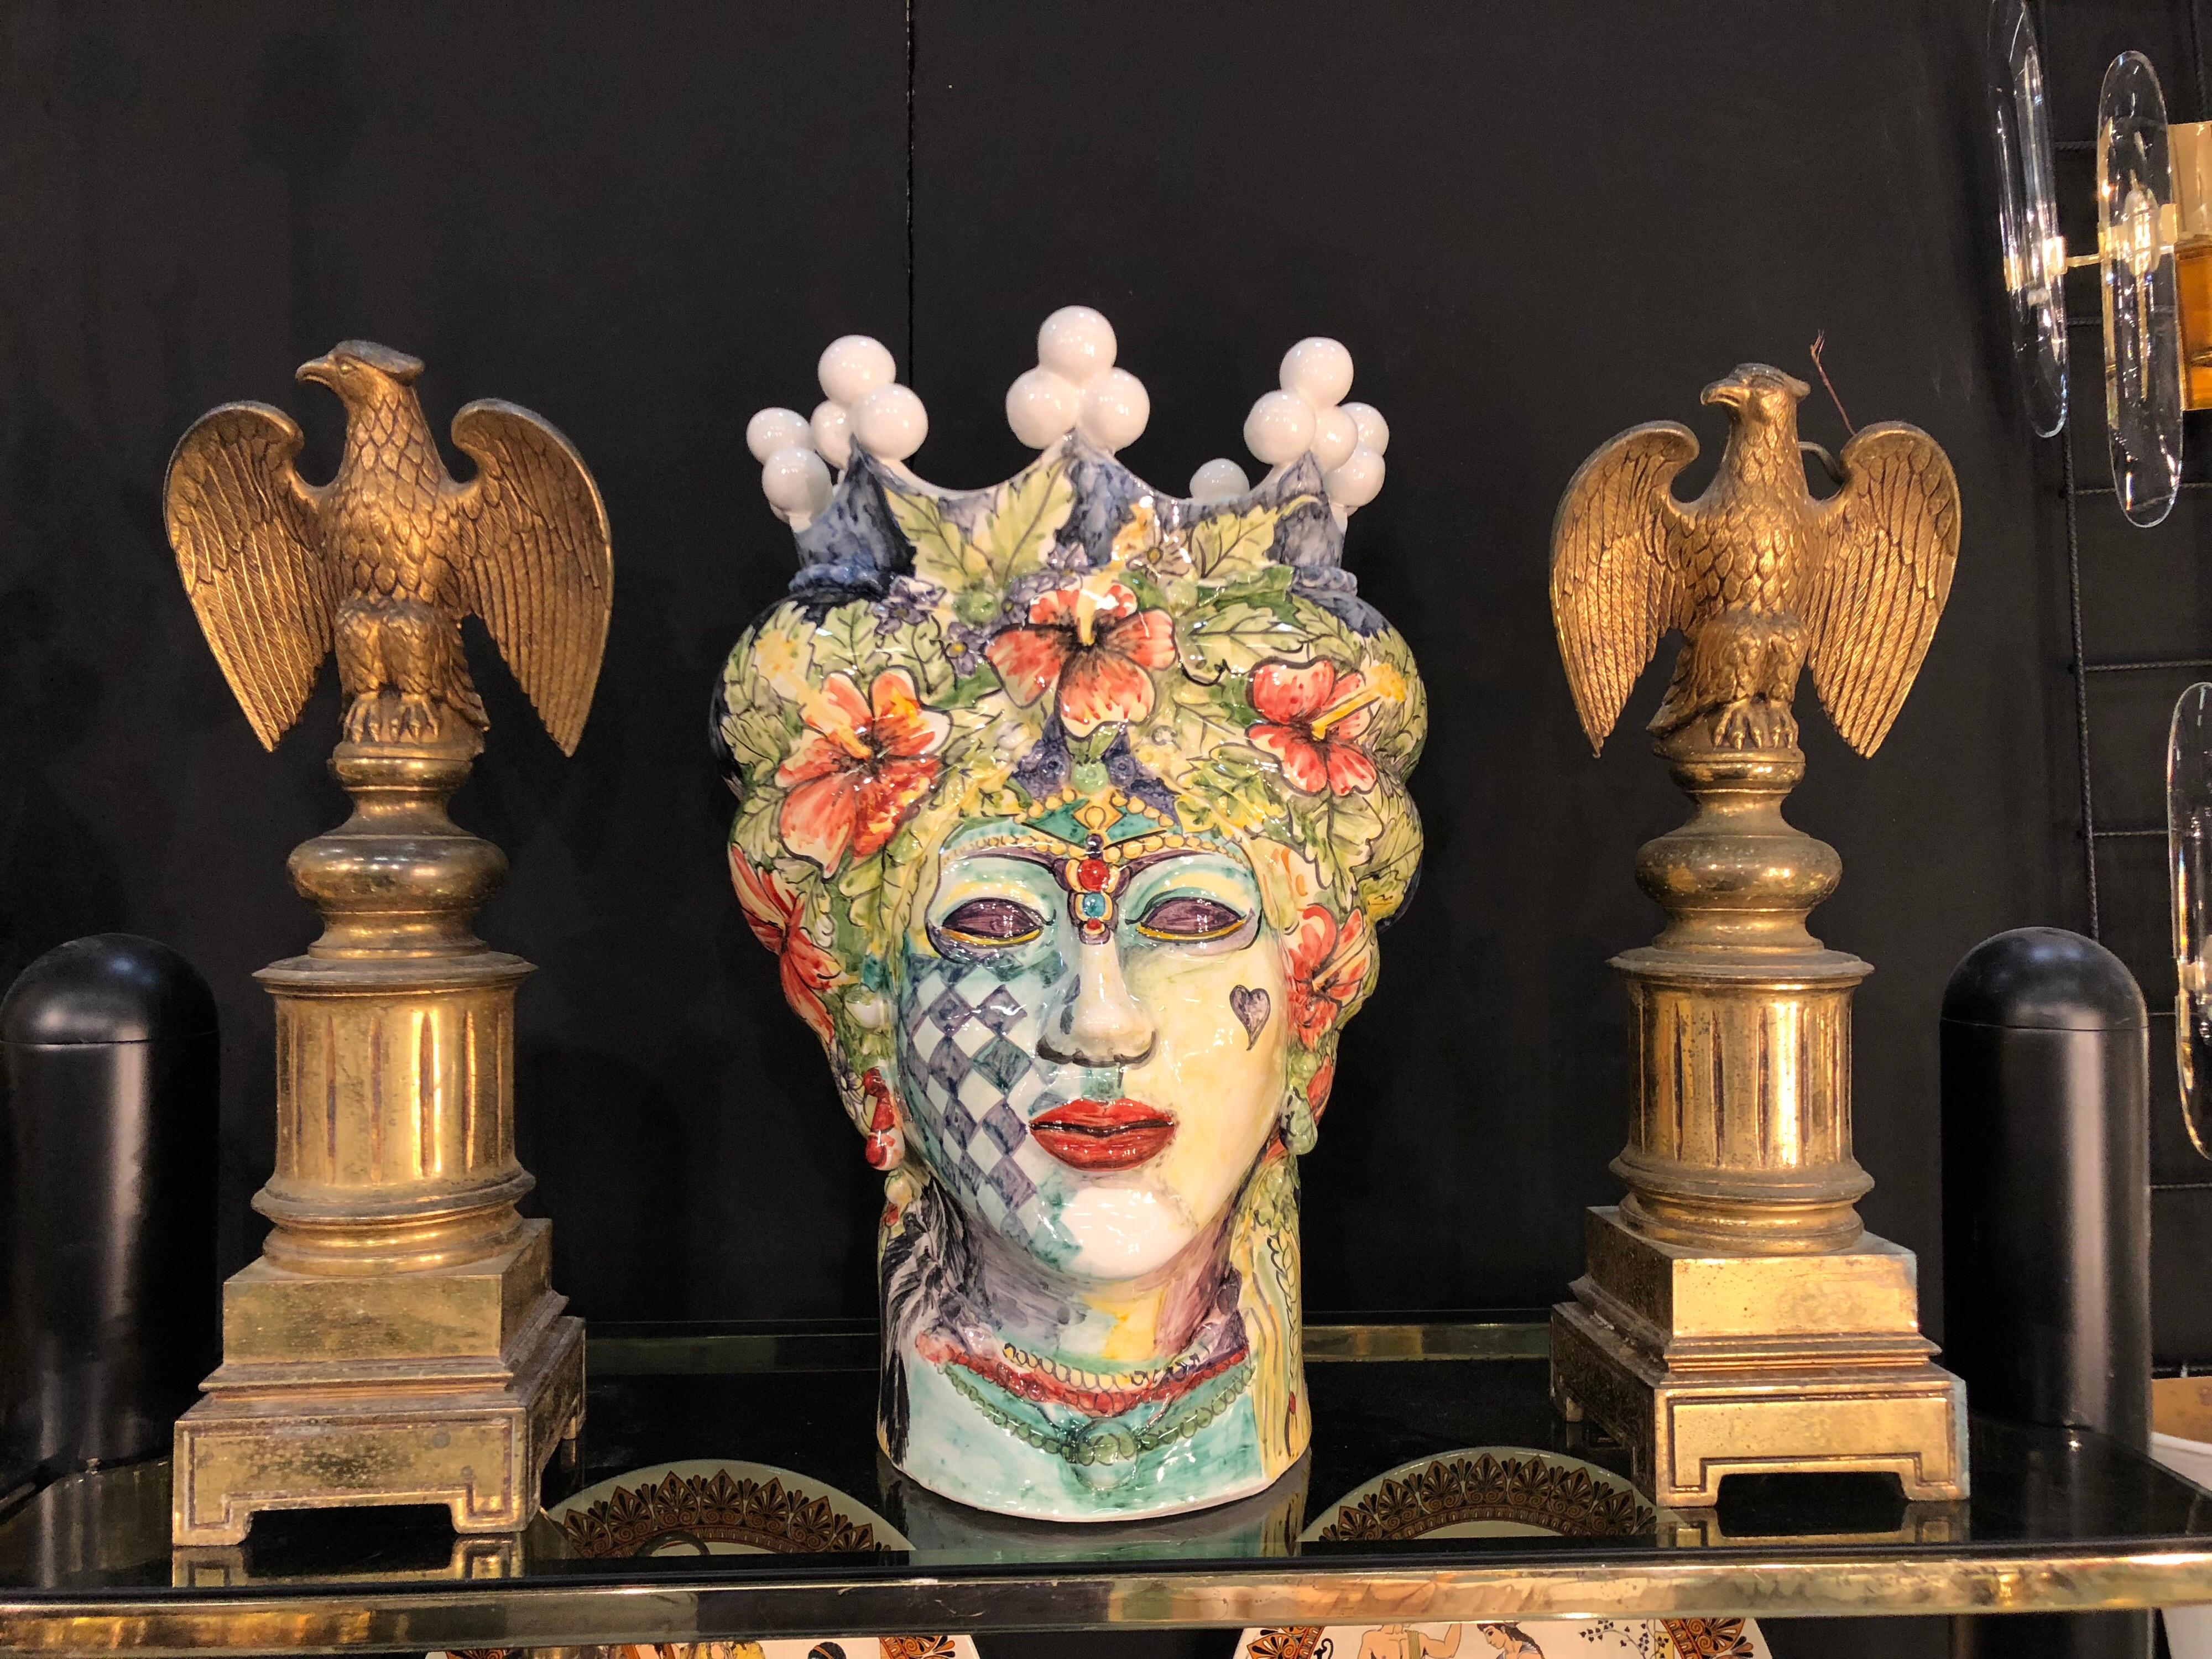 It's an unique piece made by a sicilian young artist, it's in white clay and fully hand-painted, made in Caltagirone, a little town near Catania. Signed 1/1 m.r. on the bottom.